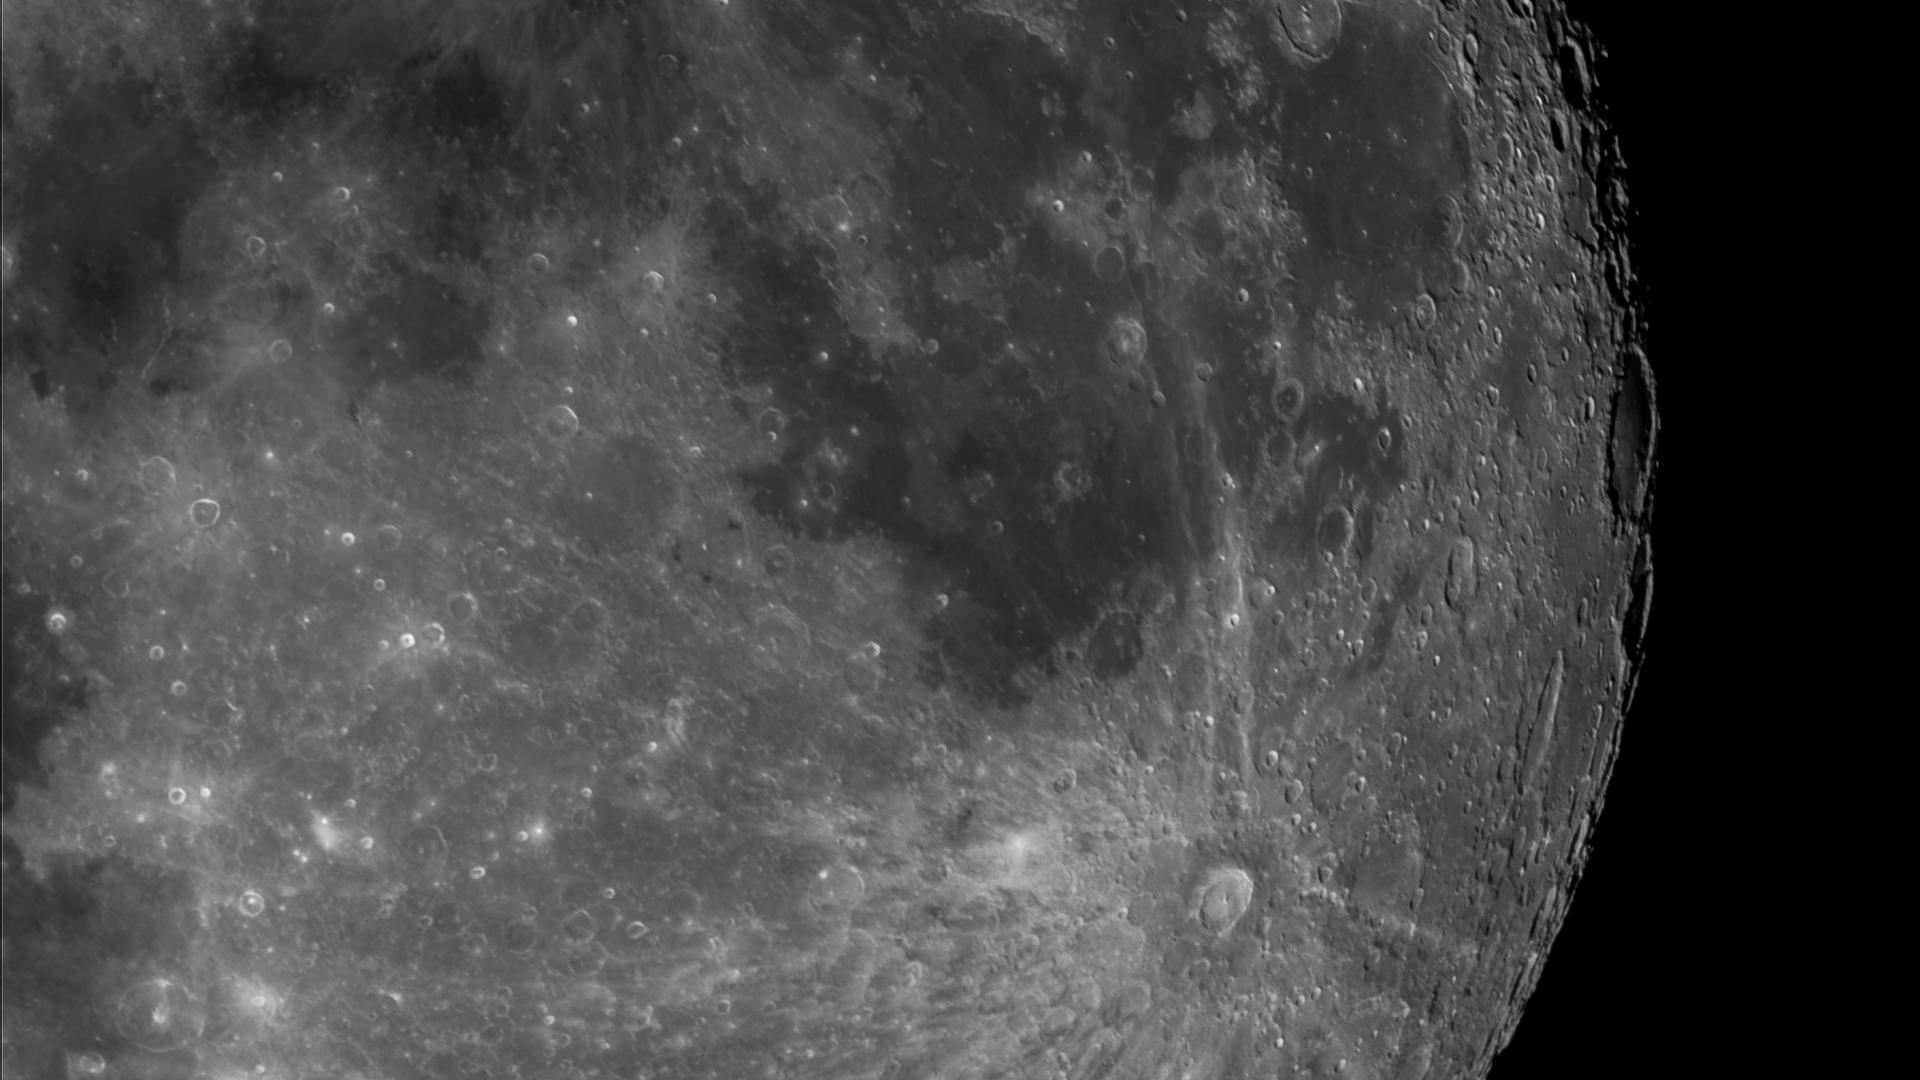 An image of the Moon taken at the event in 2022